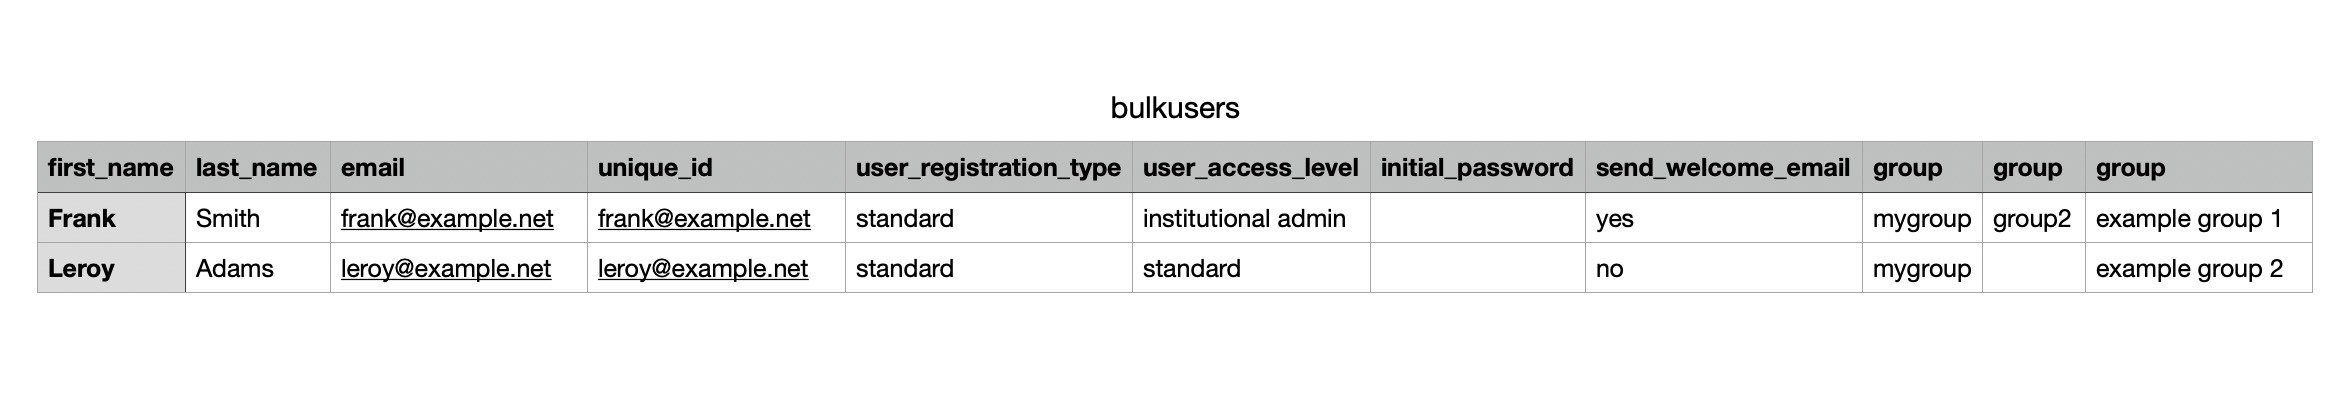 Example CSV file to show import bulk users